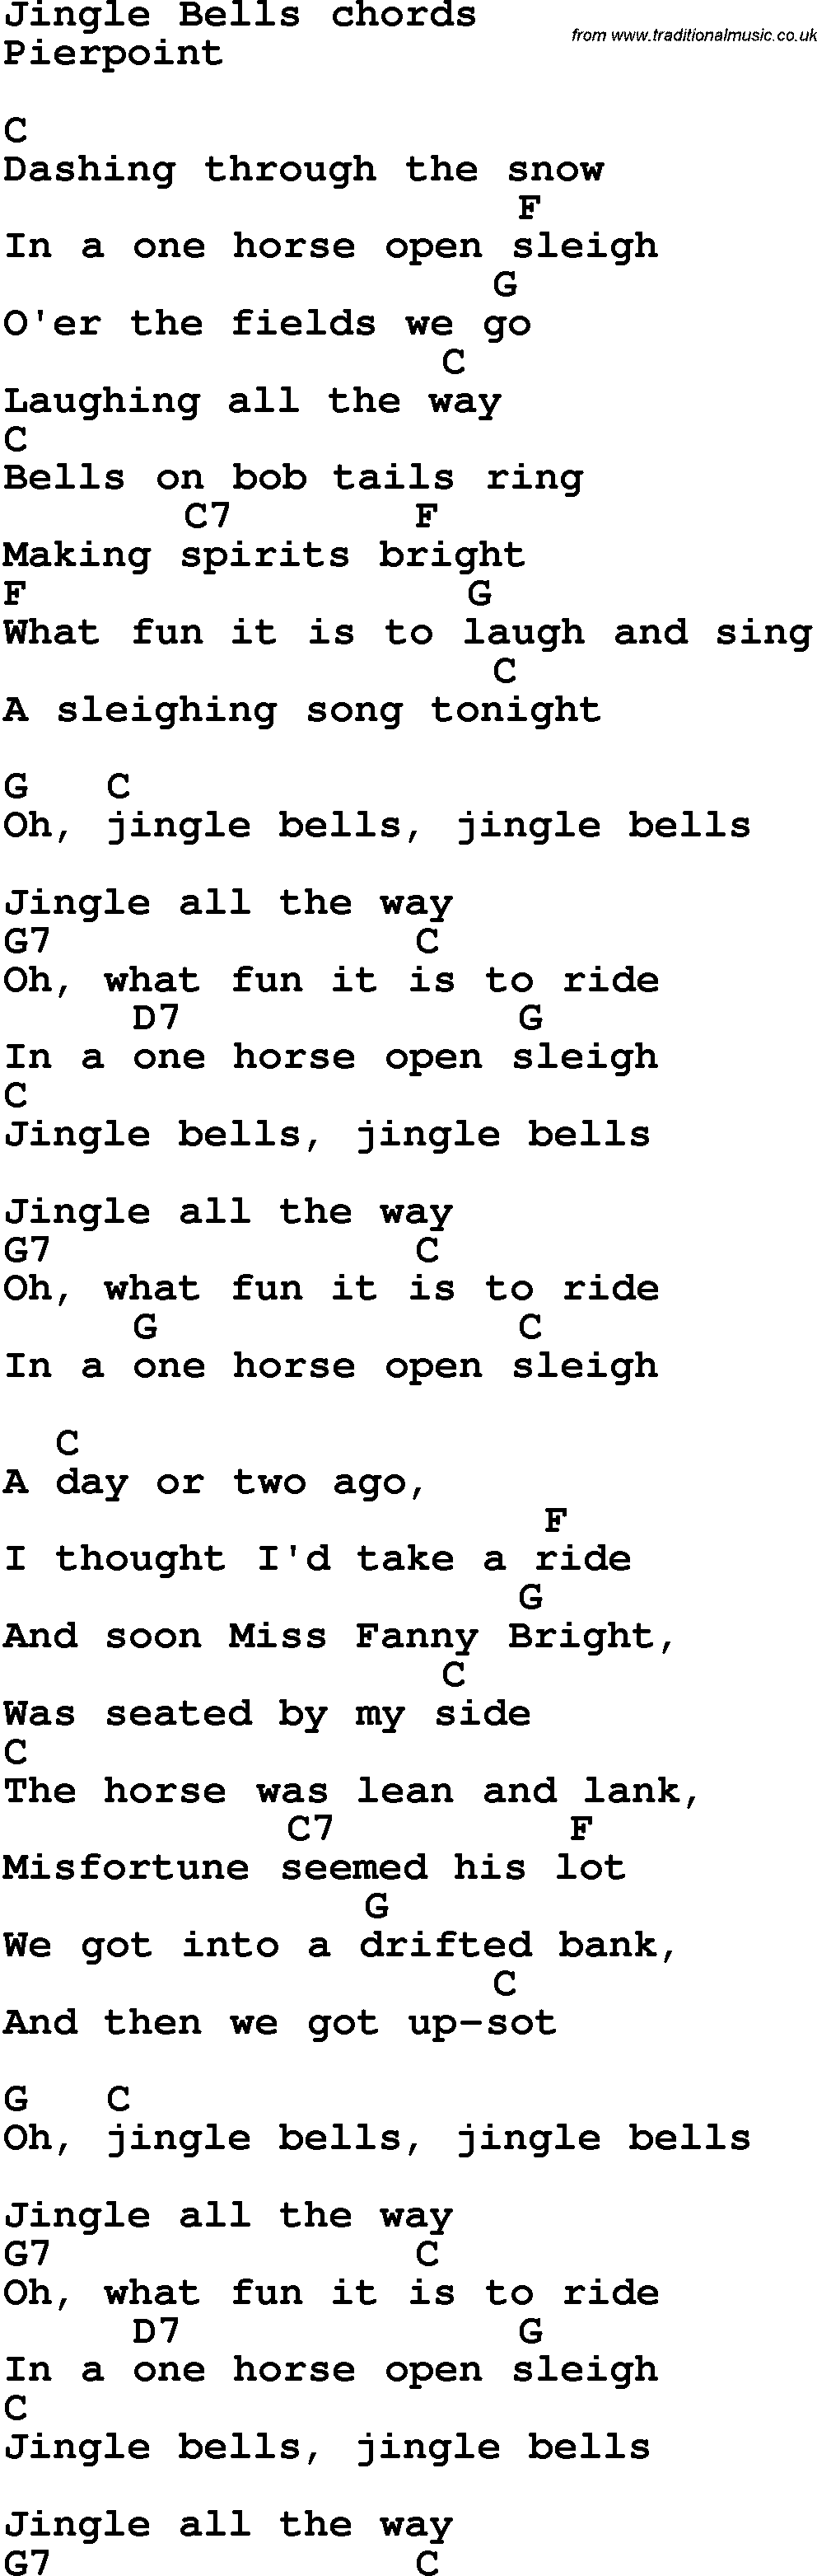 Song lyrics with guitar chords for Jingle Bells